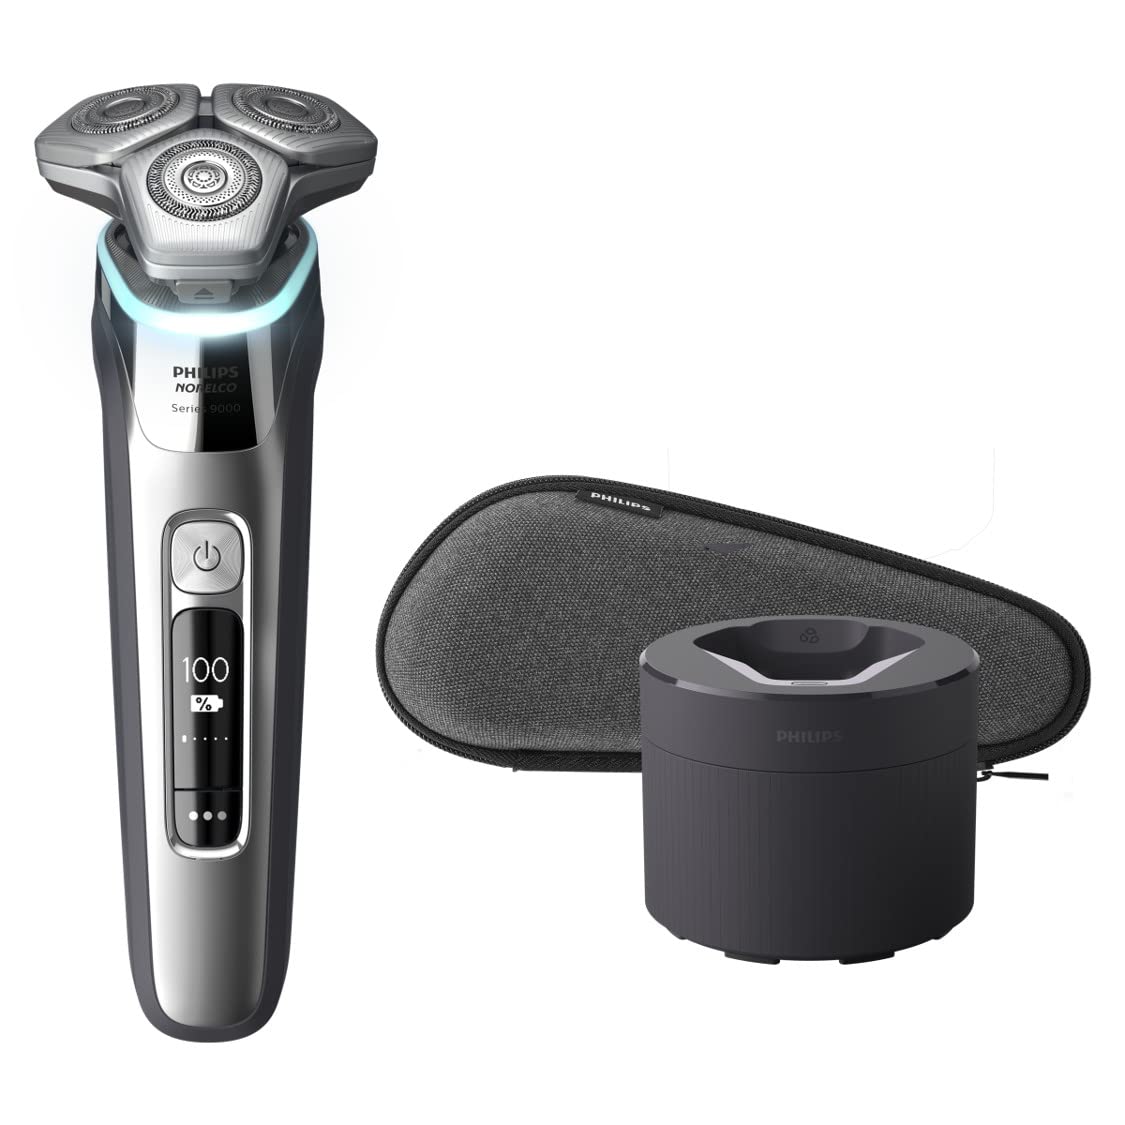 Philips Norelco Shaver with Quick Clean